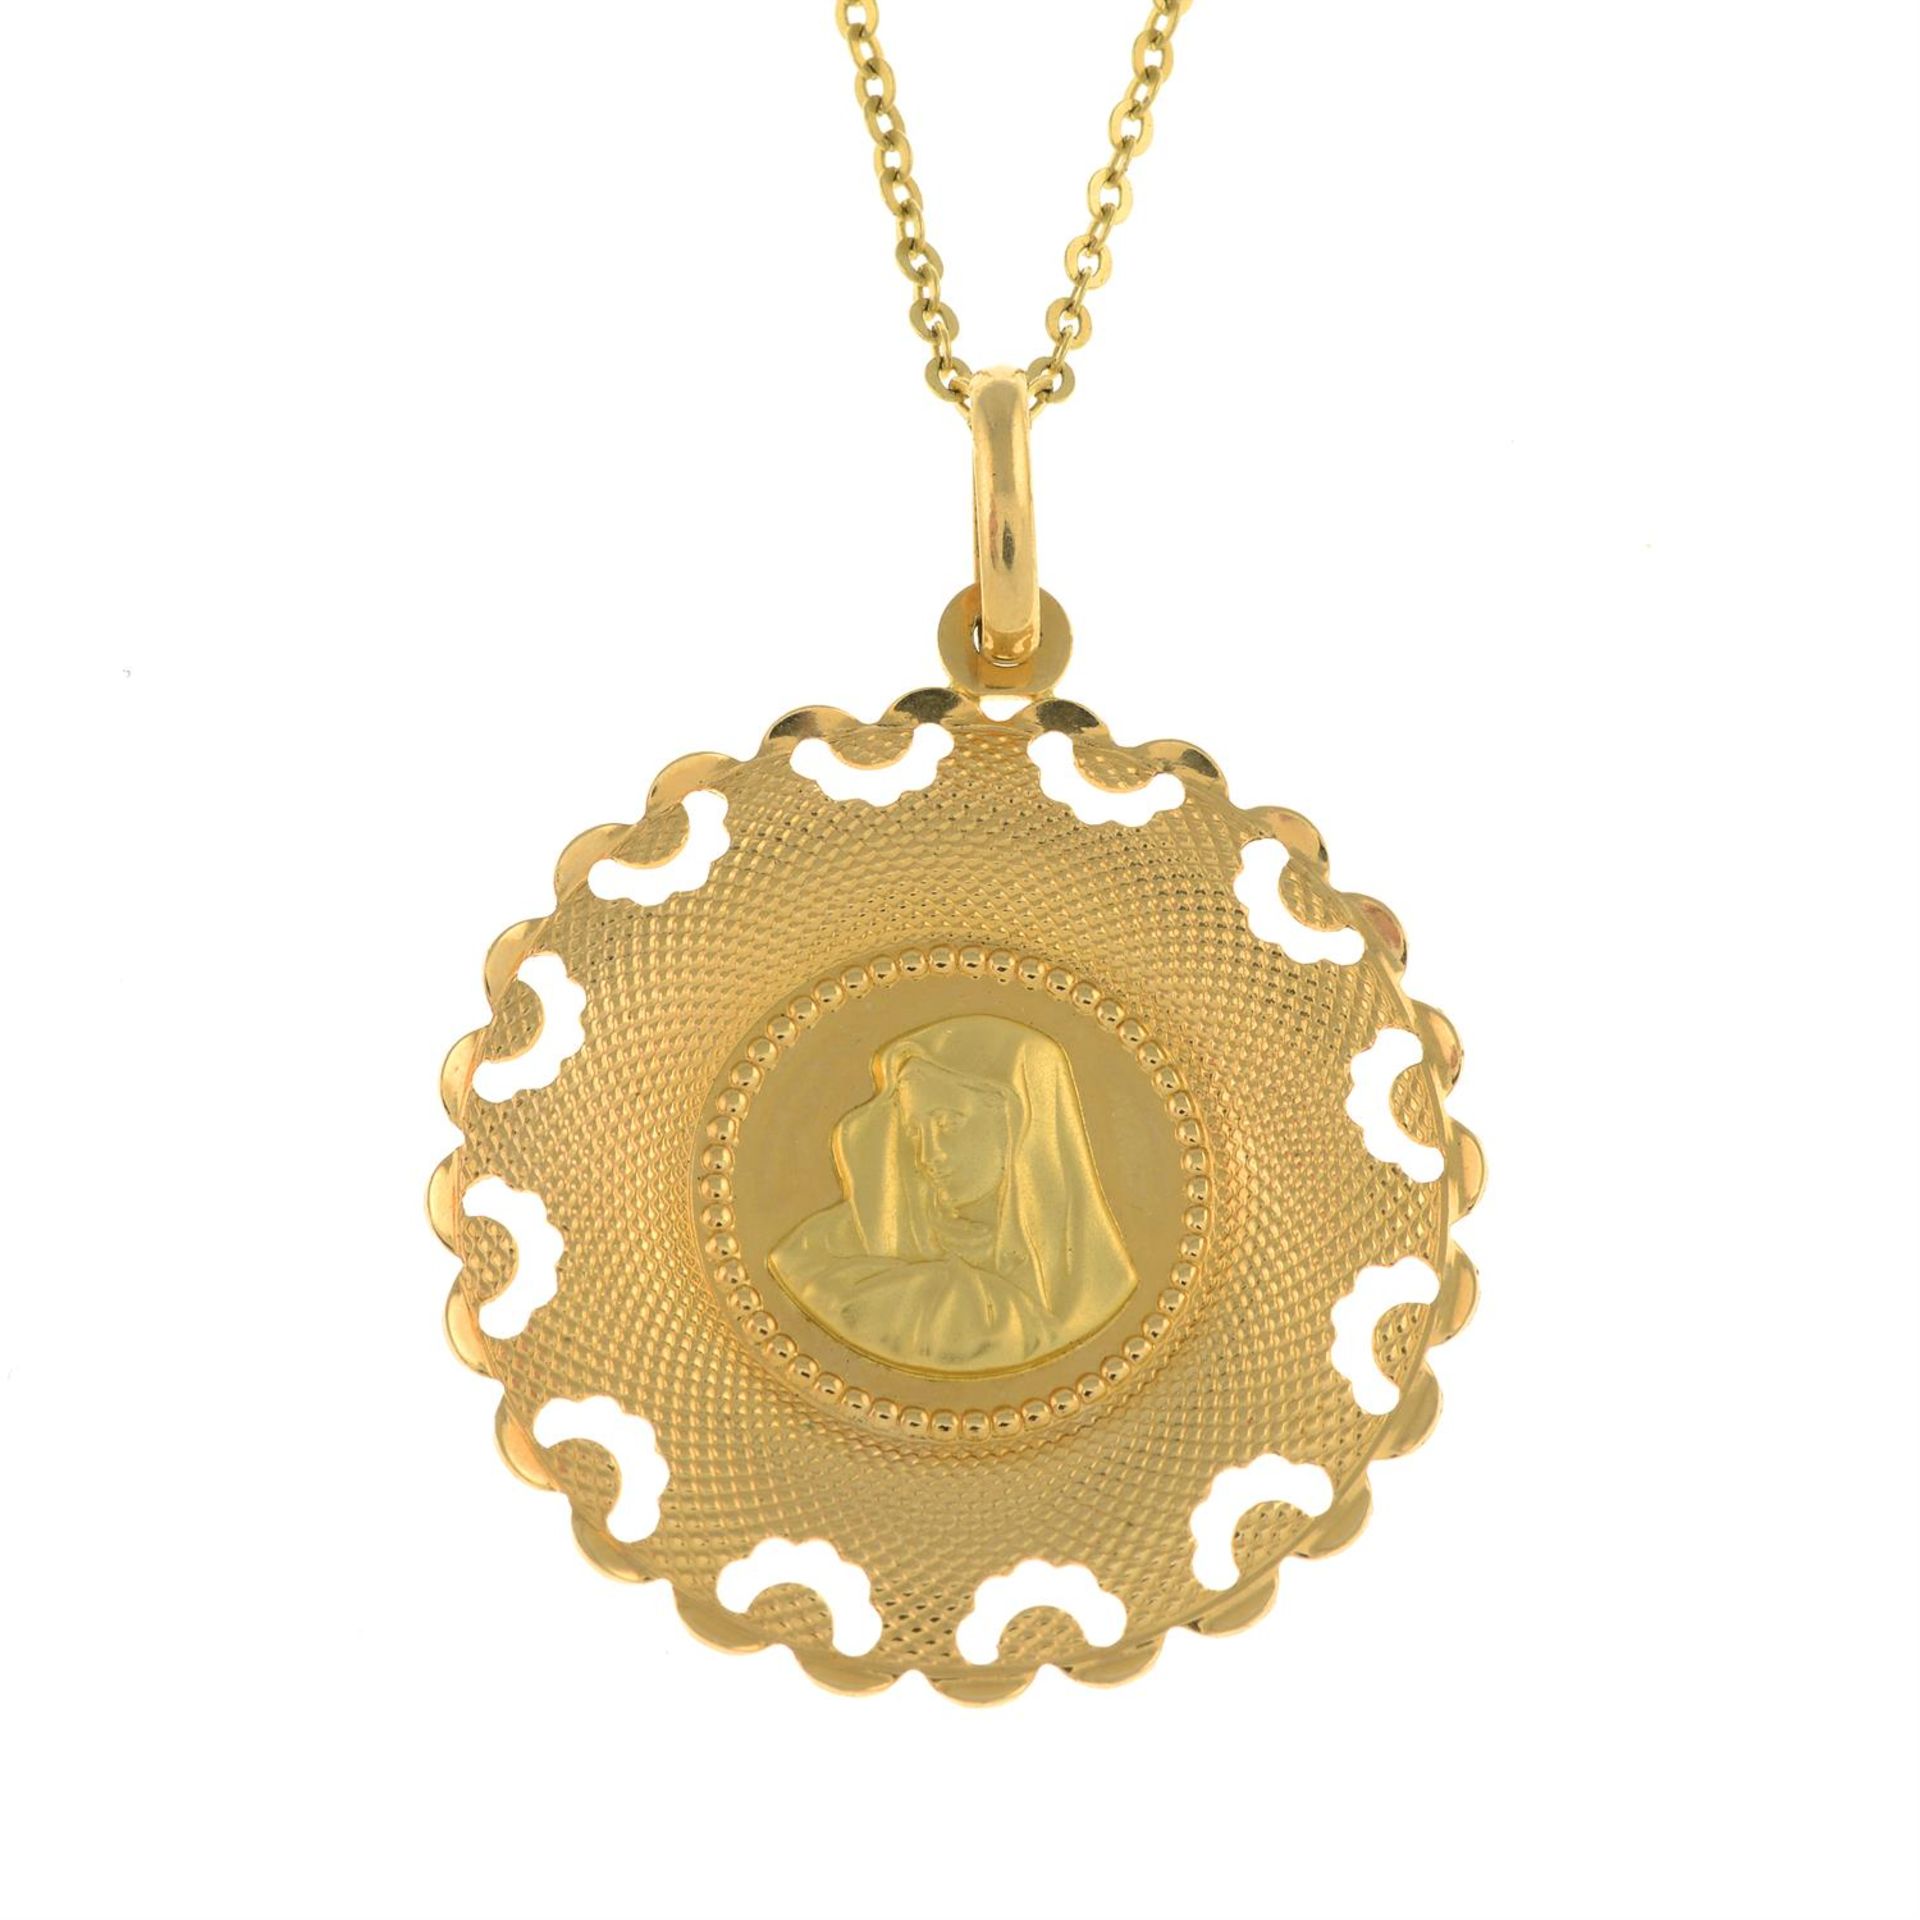 Mother Mary pendant, with chain.